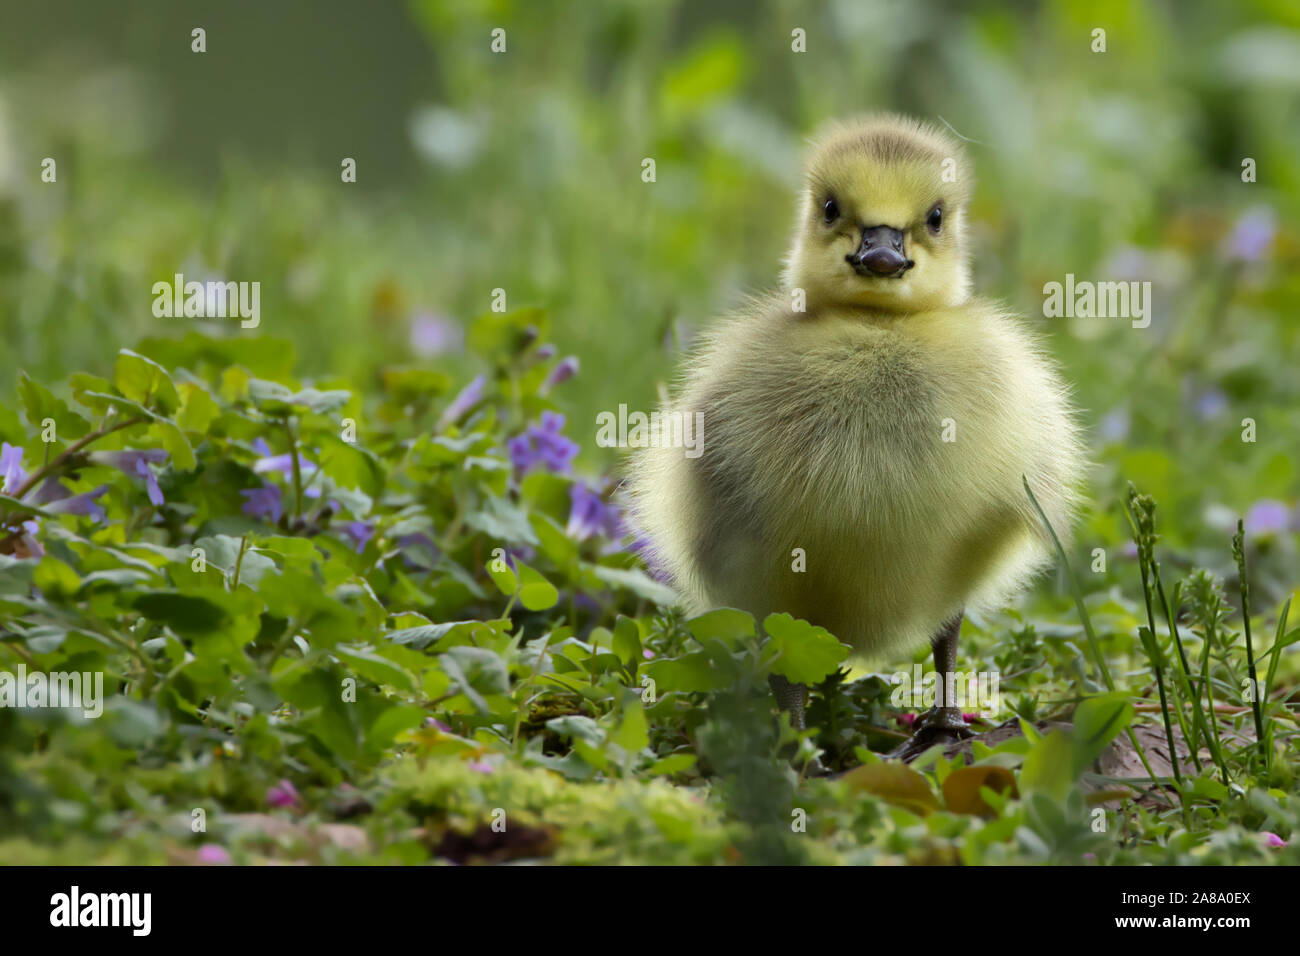 Canada Goose Gosling Standing In the Wildflowers at the Pond In Gladstone, New Jersey Stock Photo